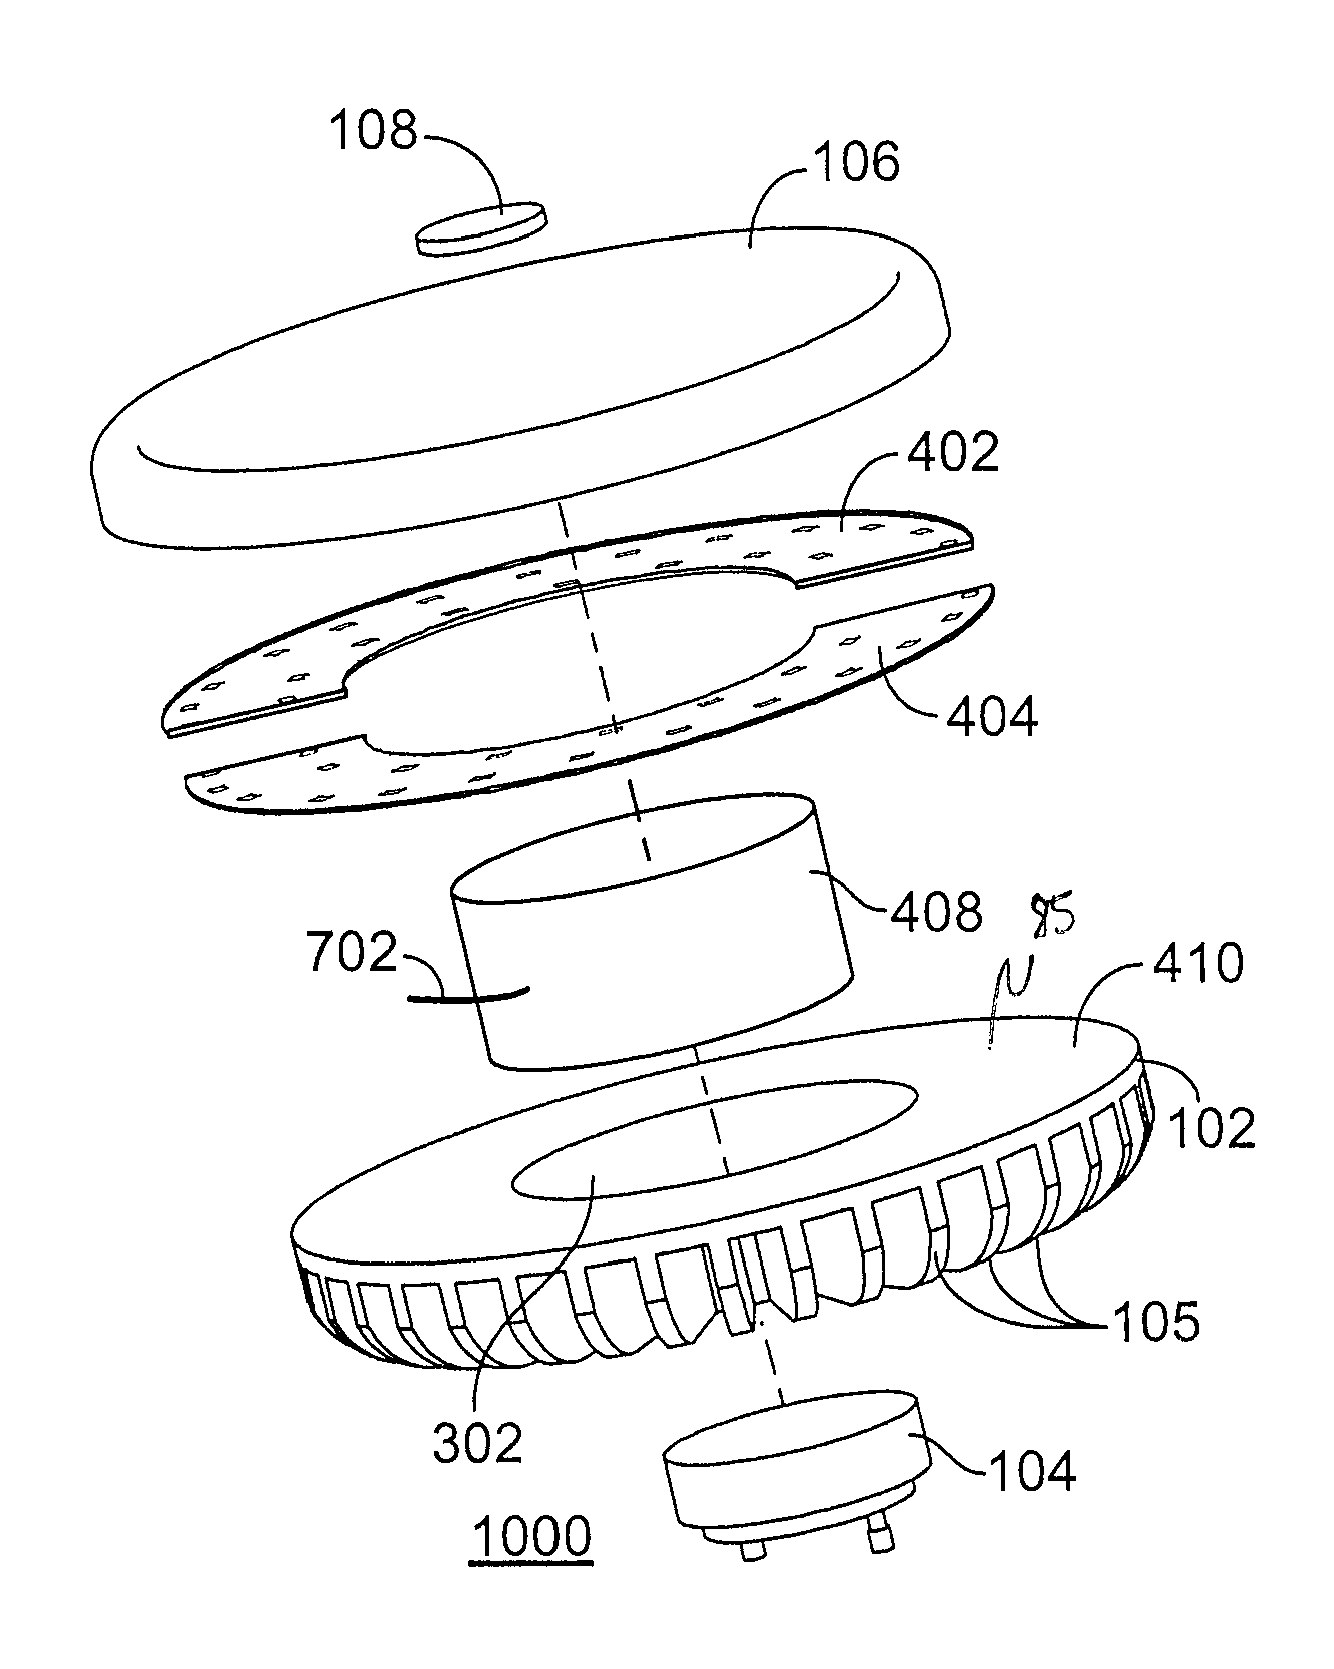 LED illumination device with isolated driving circuitry